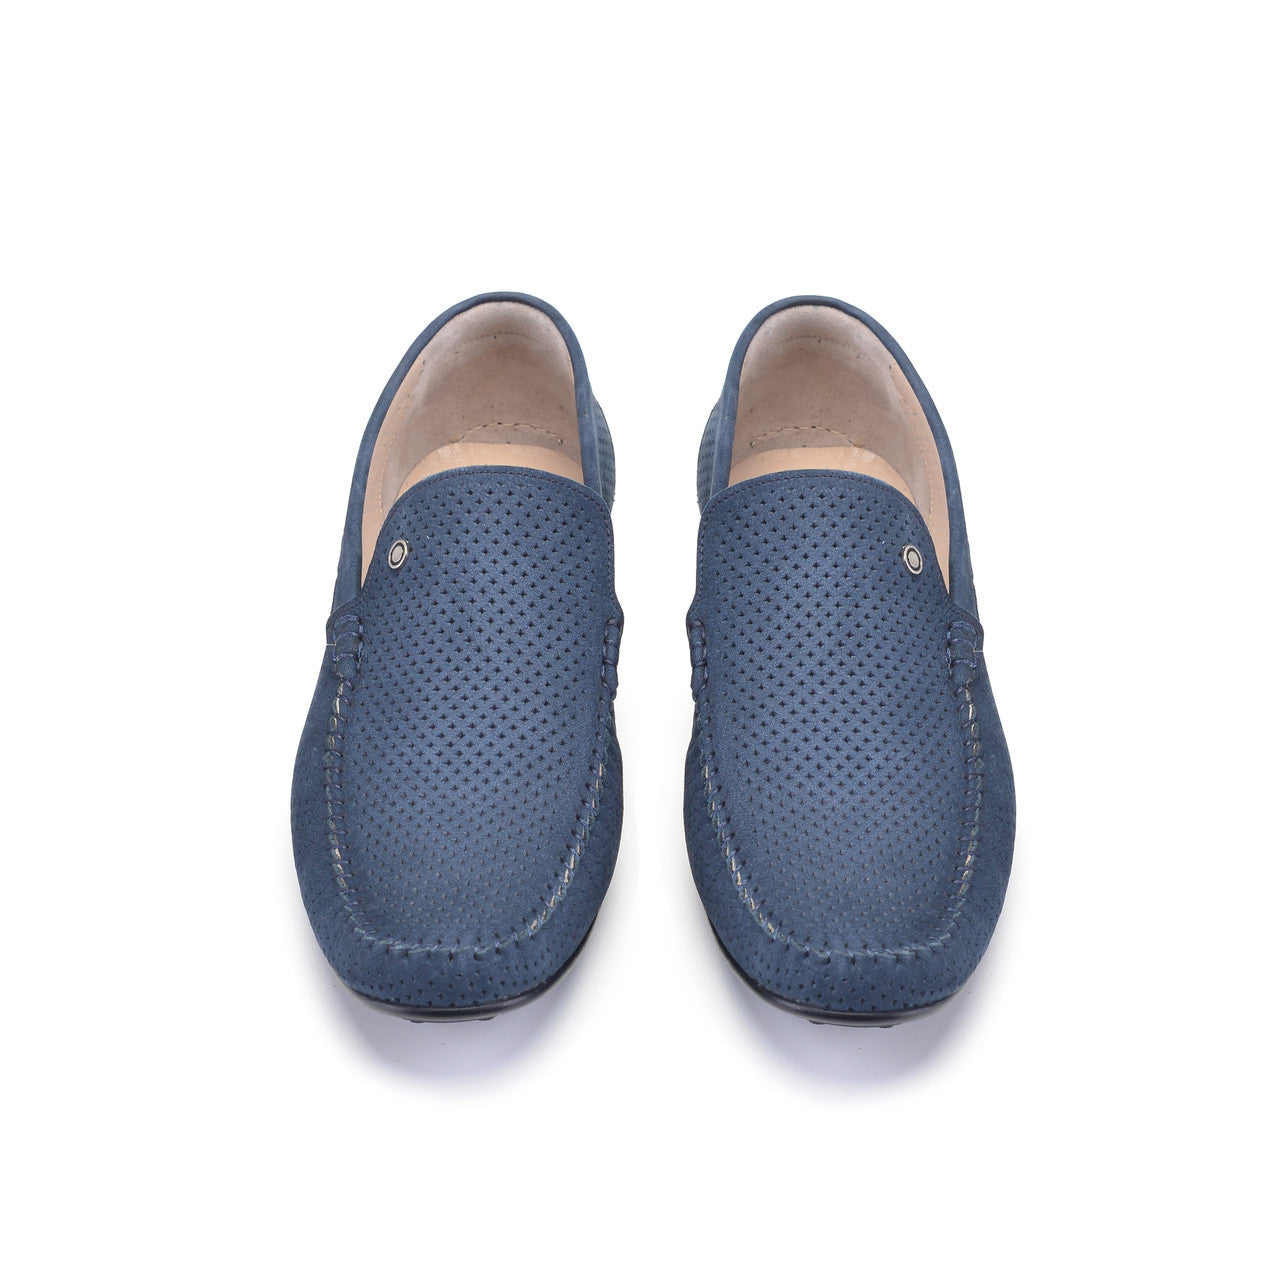 P00026- 2301 -perforated Driving shoe Navy